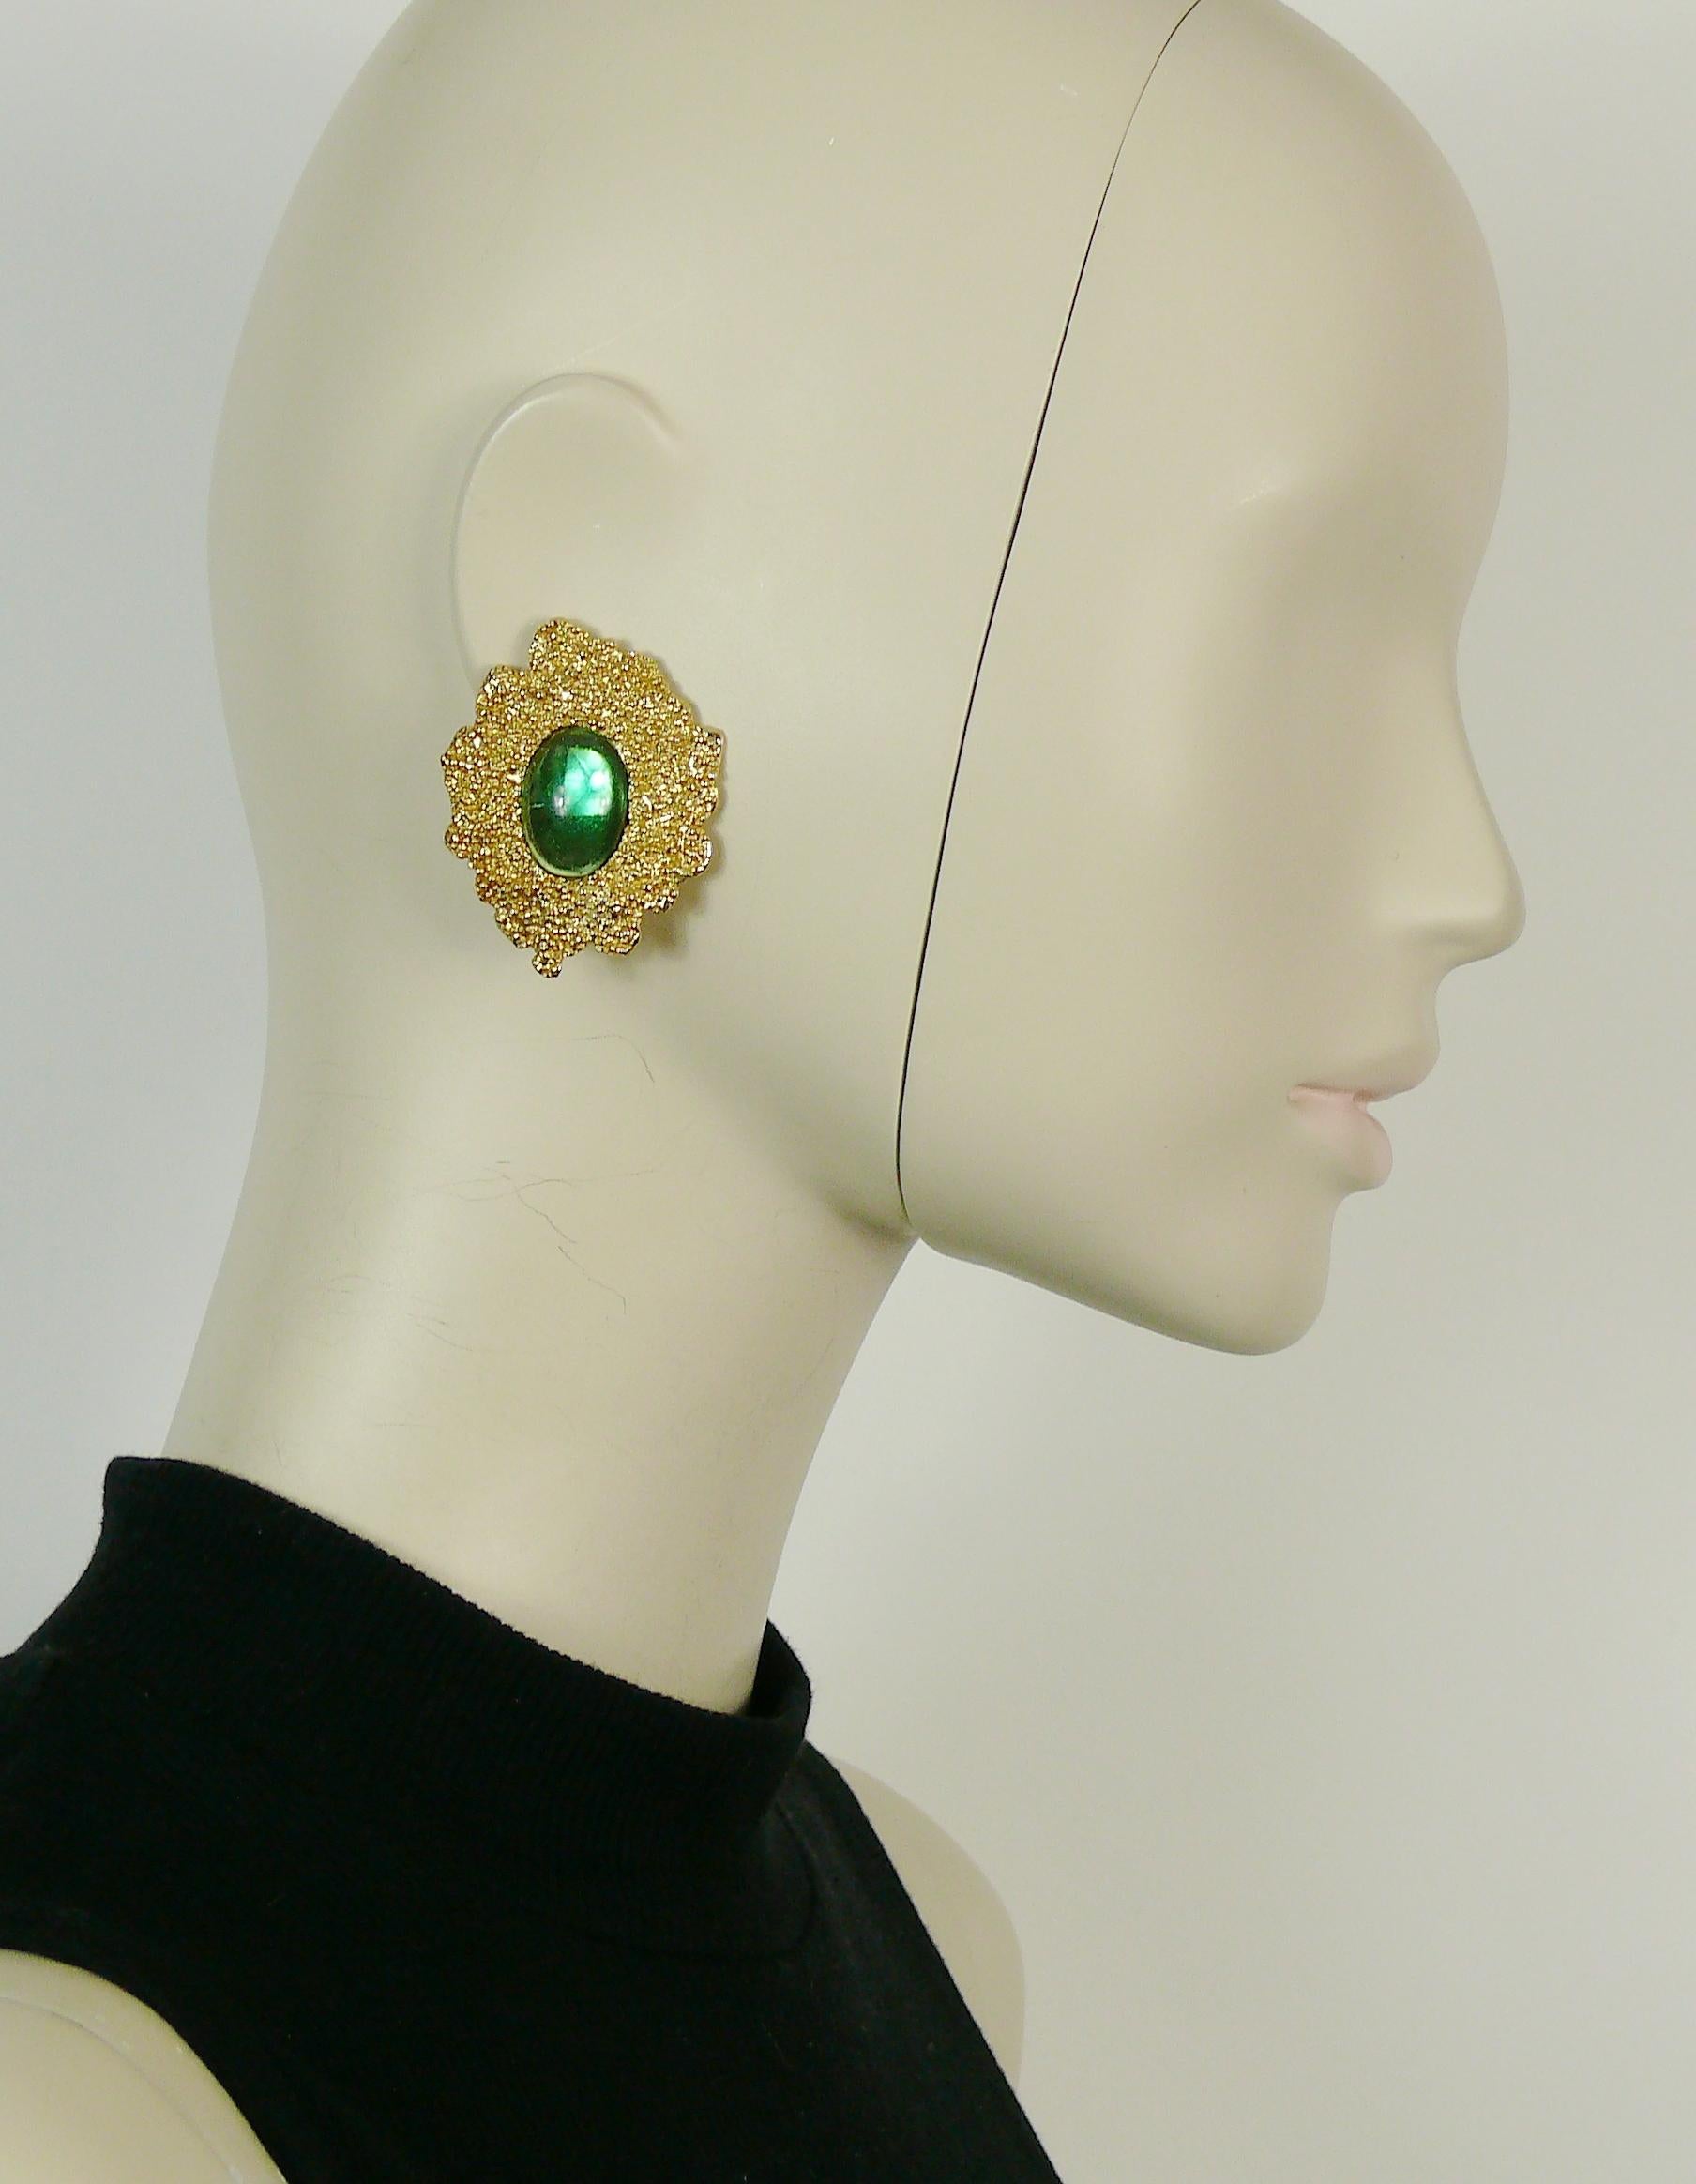 YVES SAINT LAURENT vintage textured gold tonde clip-on earrings featuring a large emerald resin cabochon.

Embossed YSL Made in France.

Indicative measurements : max. height approx. 4.8 cm (1.89 inches) / max. width approx. 4.2 cm (1.65